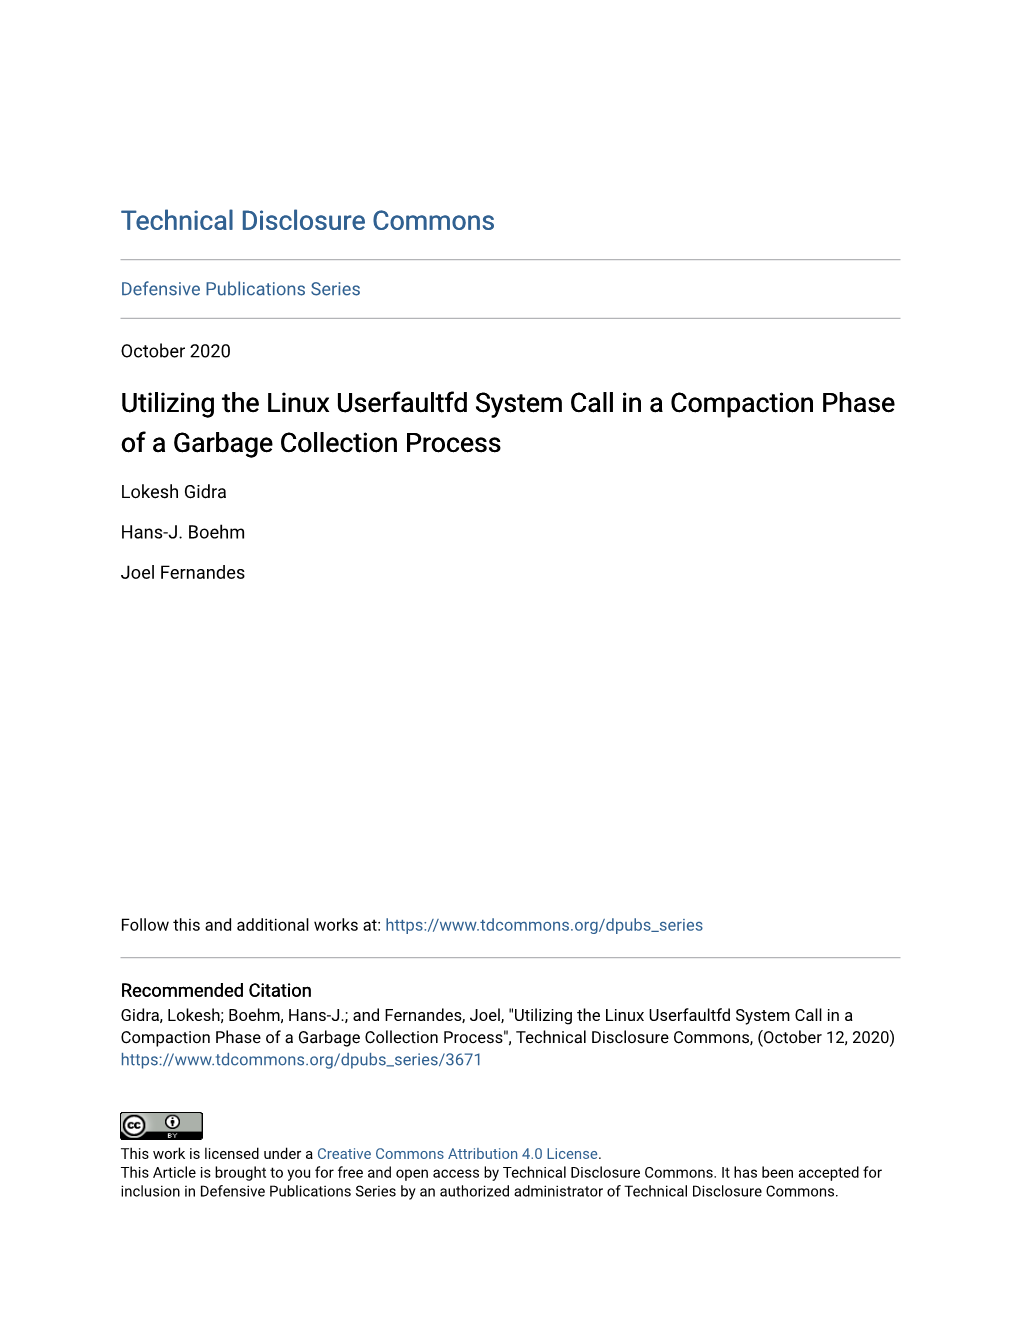 Utilizing the Linux Userfaultfd System Call in a Compaction Phase of a Garbage Collection Process